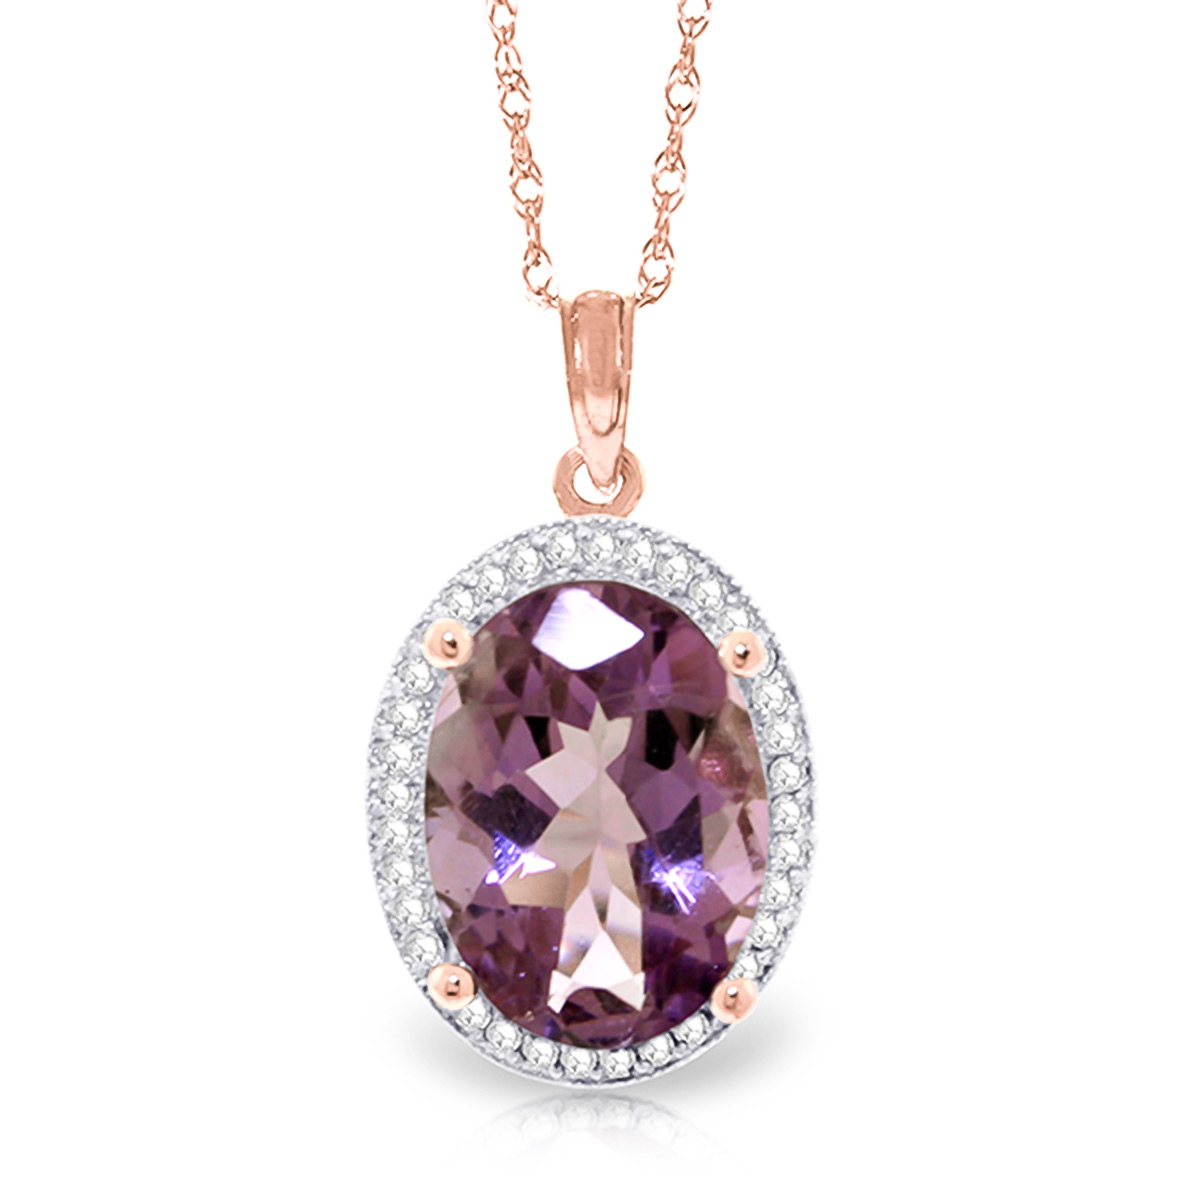 Amethyst Halo Pendant Necklace 5.28 ctw in 9ct Rose Gold